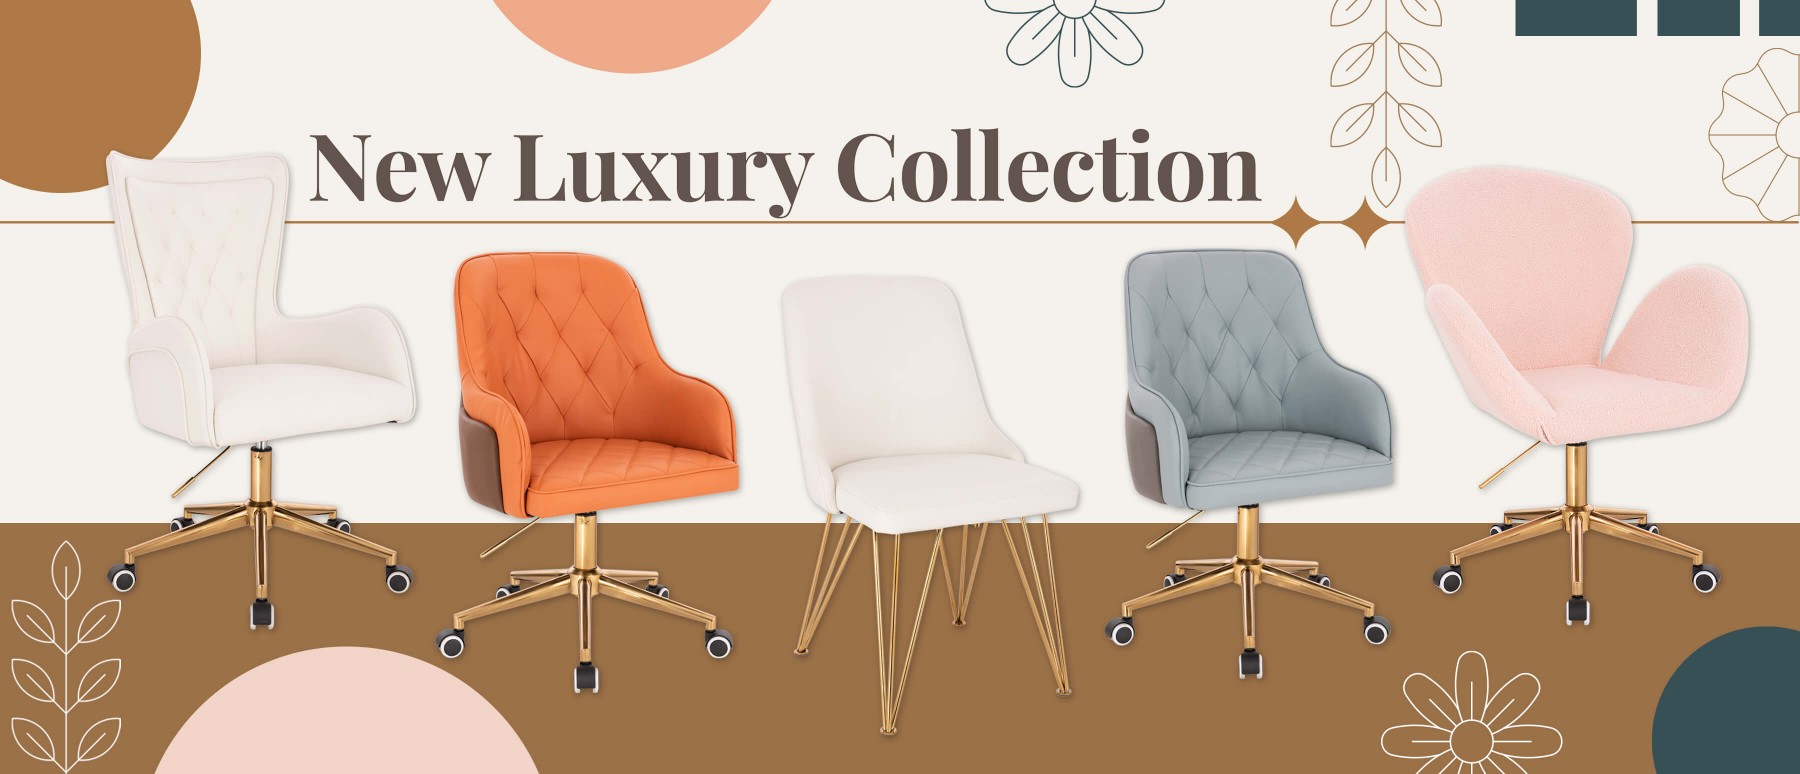 New_luxury_collection